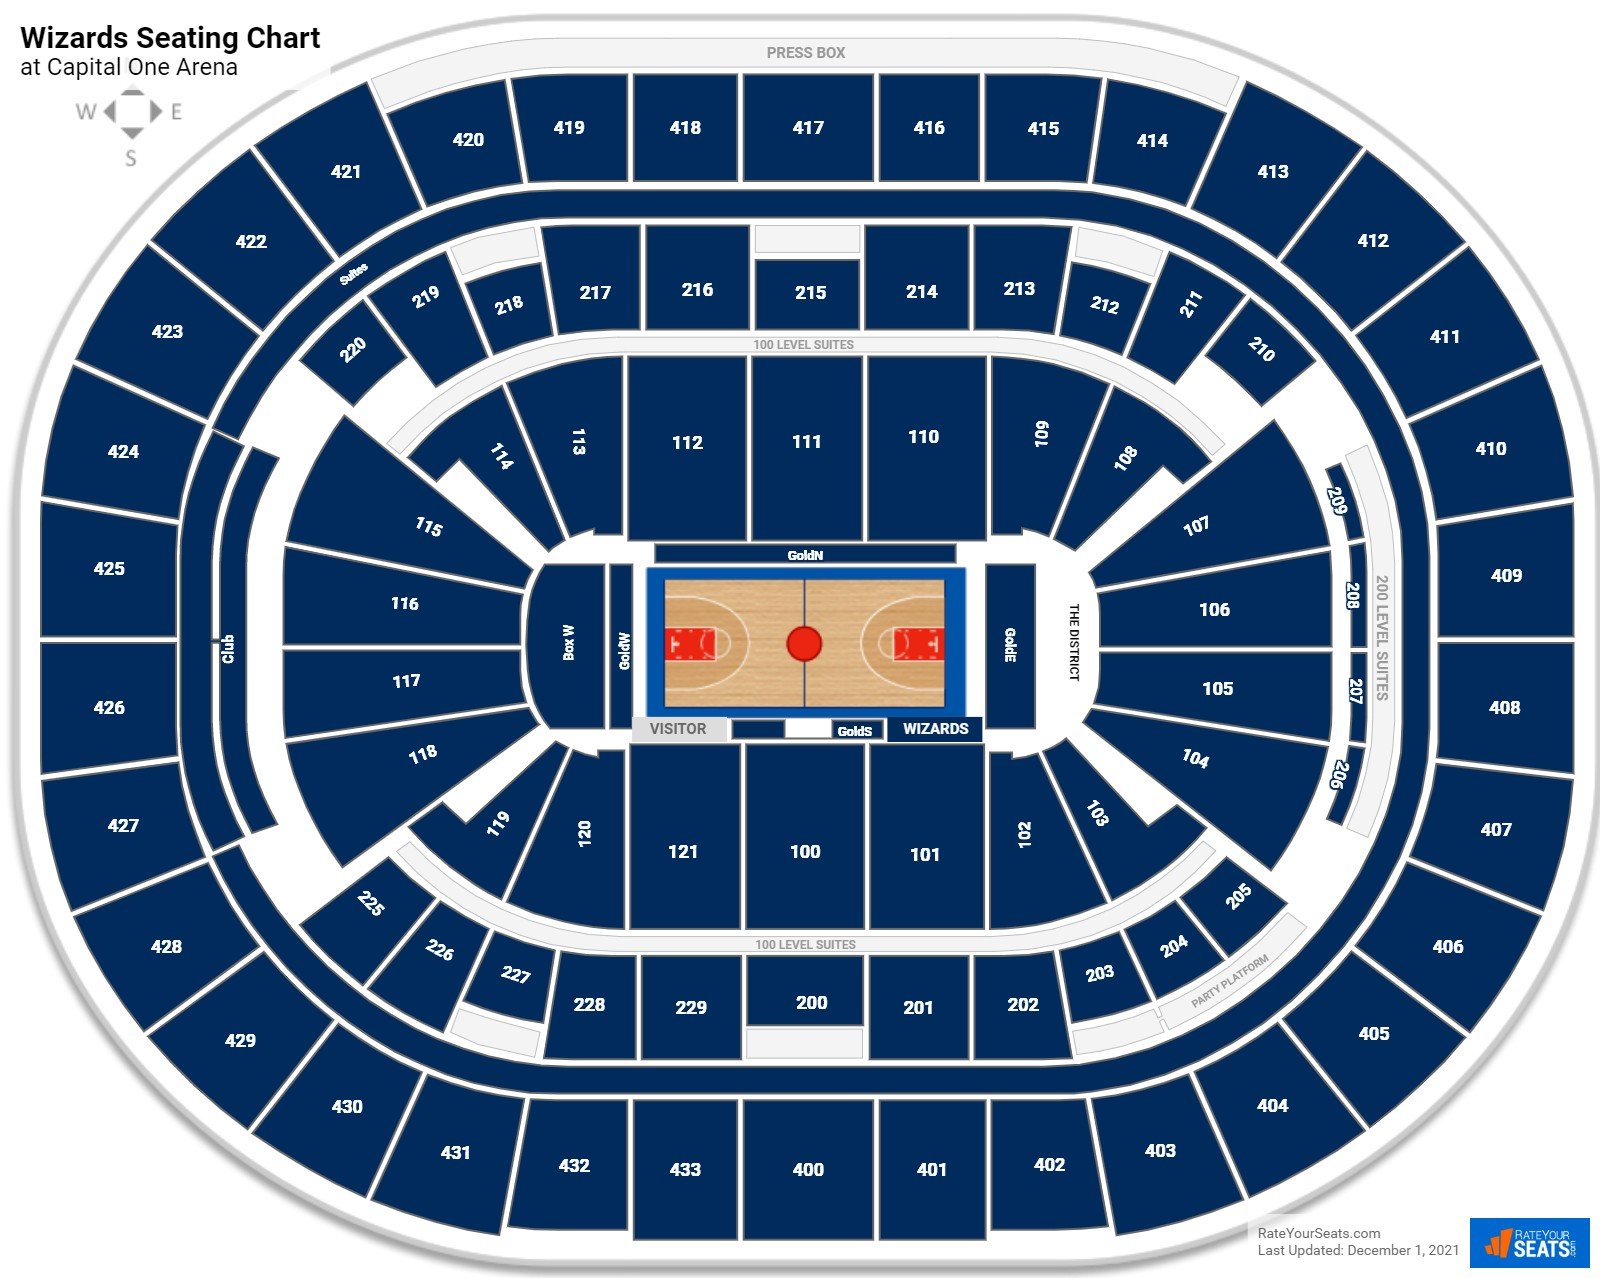 Washington Wizards Seating Chart at Capital One Arena